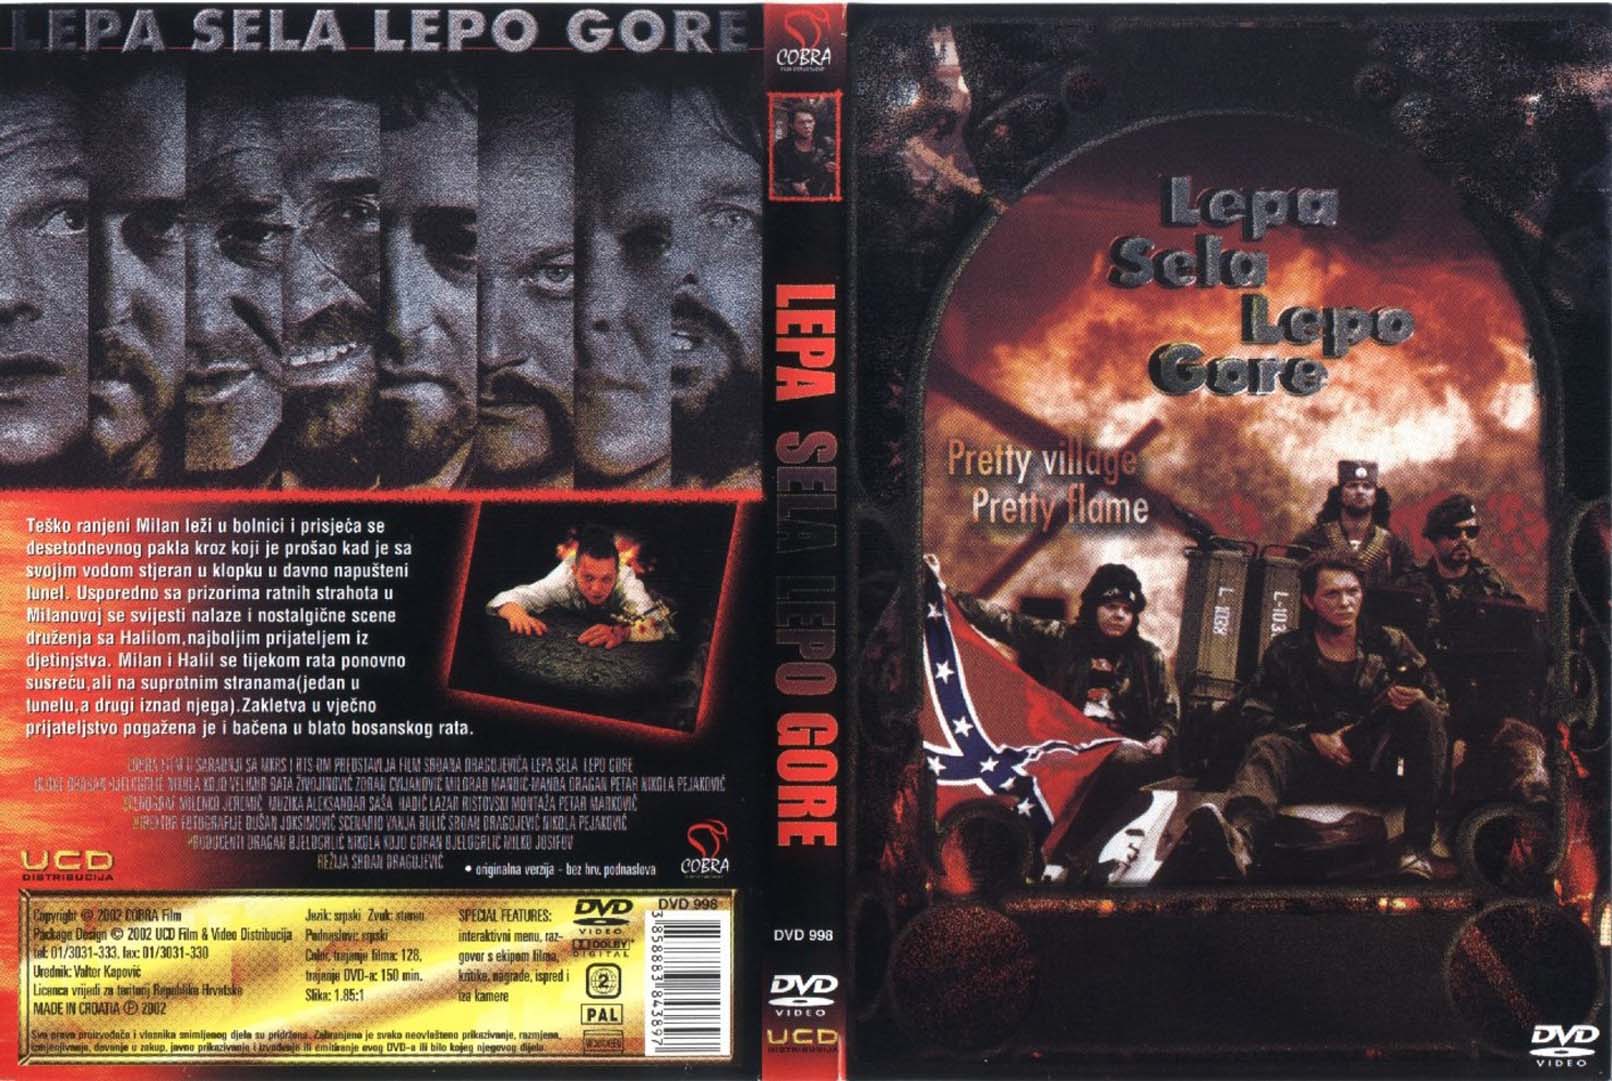 Click to view full size image -  DVD Cover - L - lepa_sela_lepo_gore_dvd_v2 - lepa_sela_lepo_gore_dvd_v2.jpg